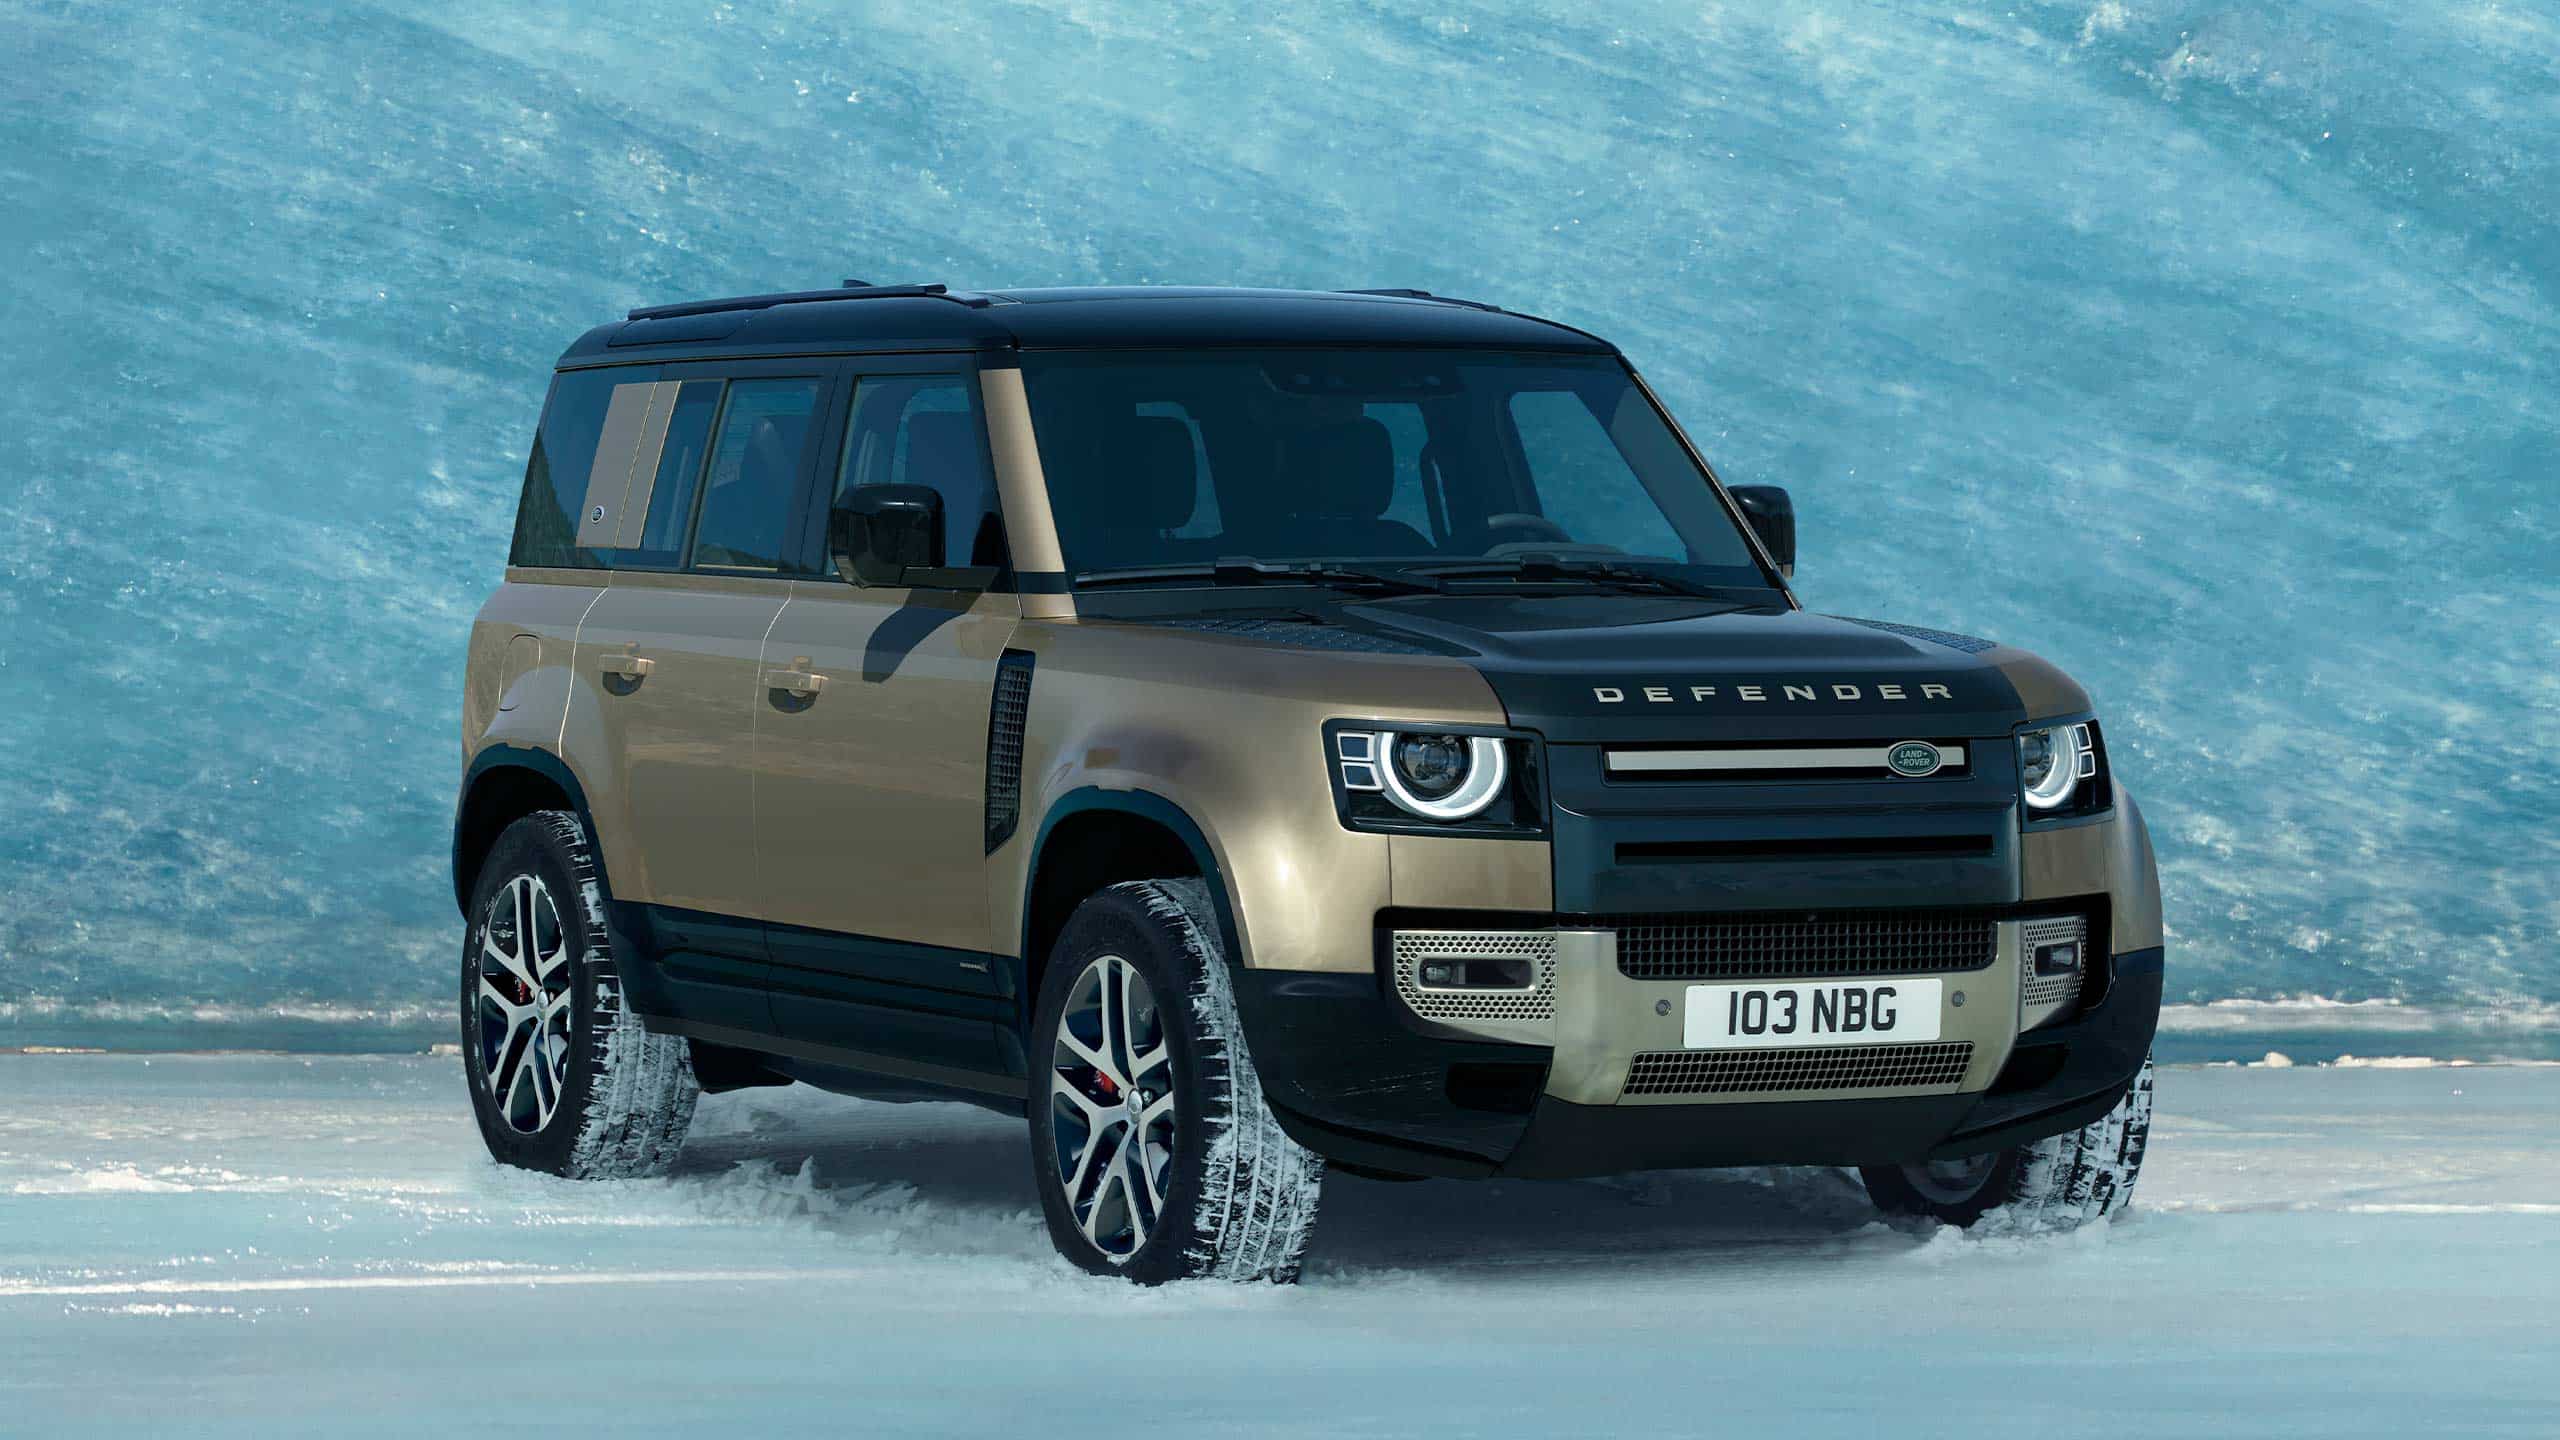 Land Rover Defender in snow background